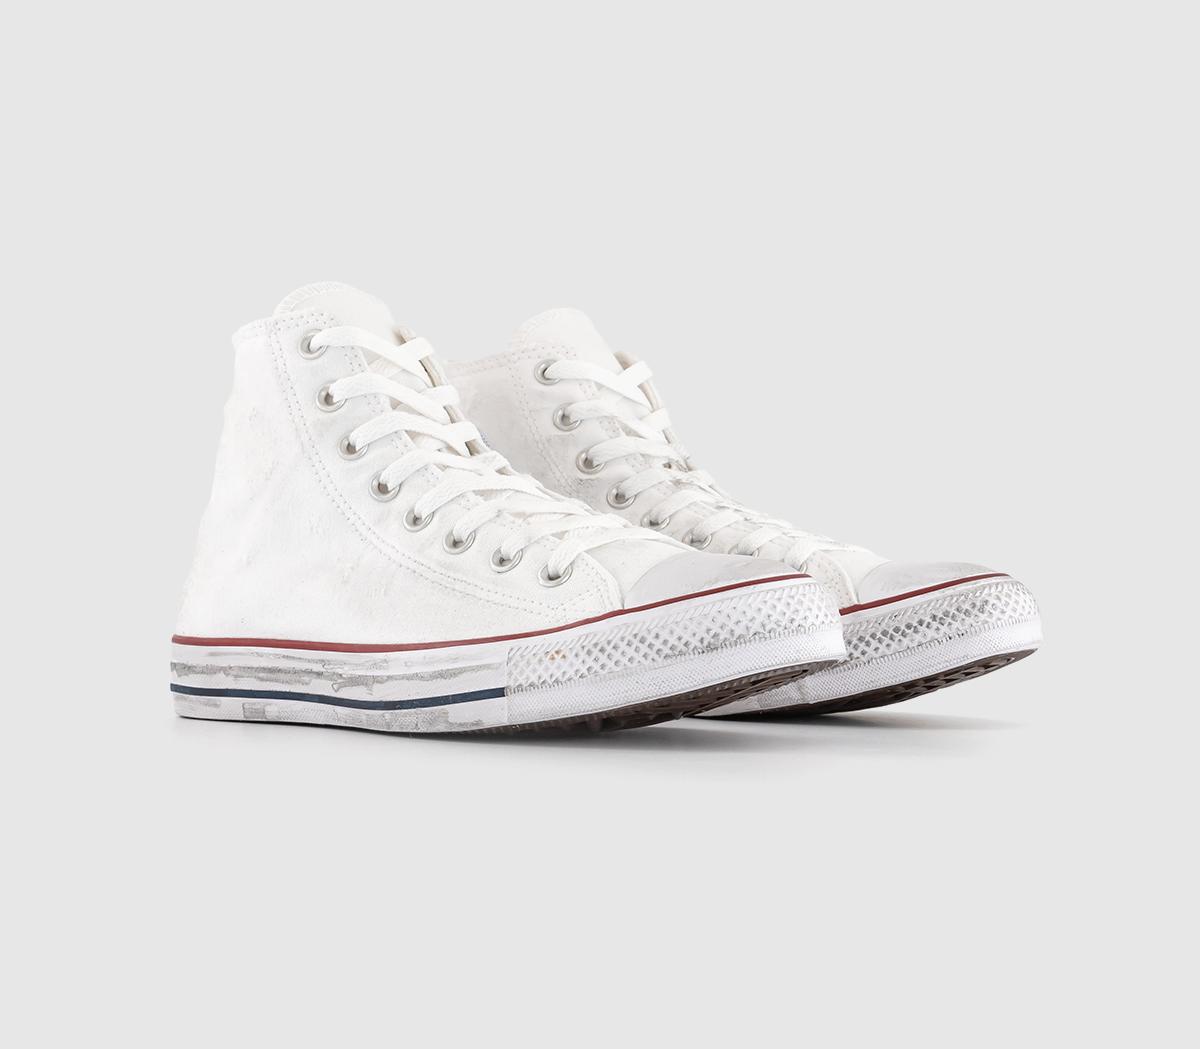 Converse Converse All Star Hi Trainers White Well Worn - Men's Trainers